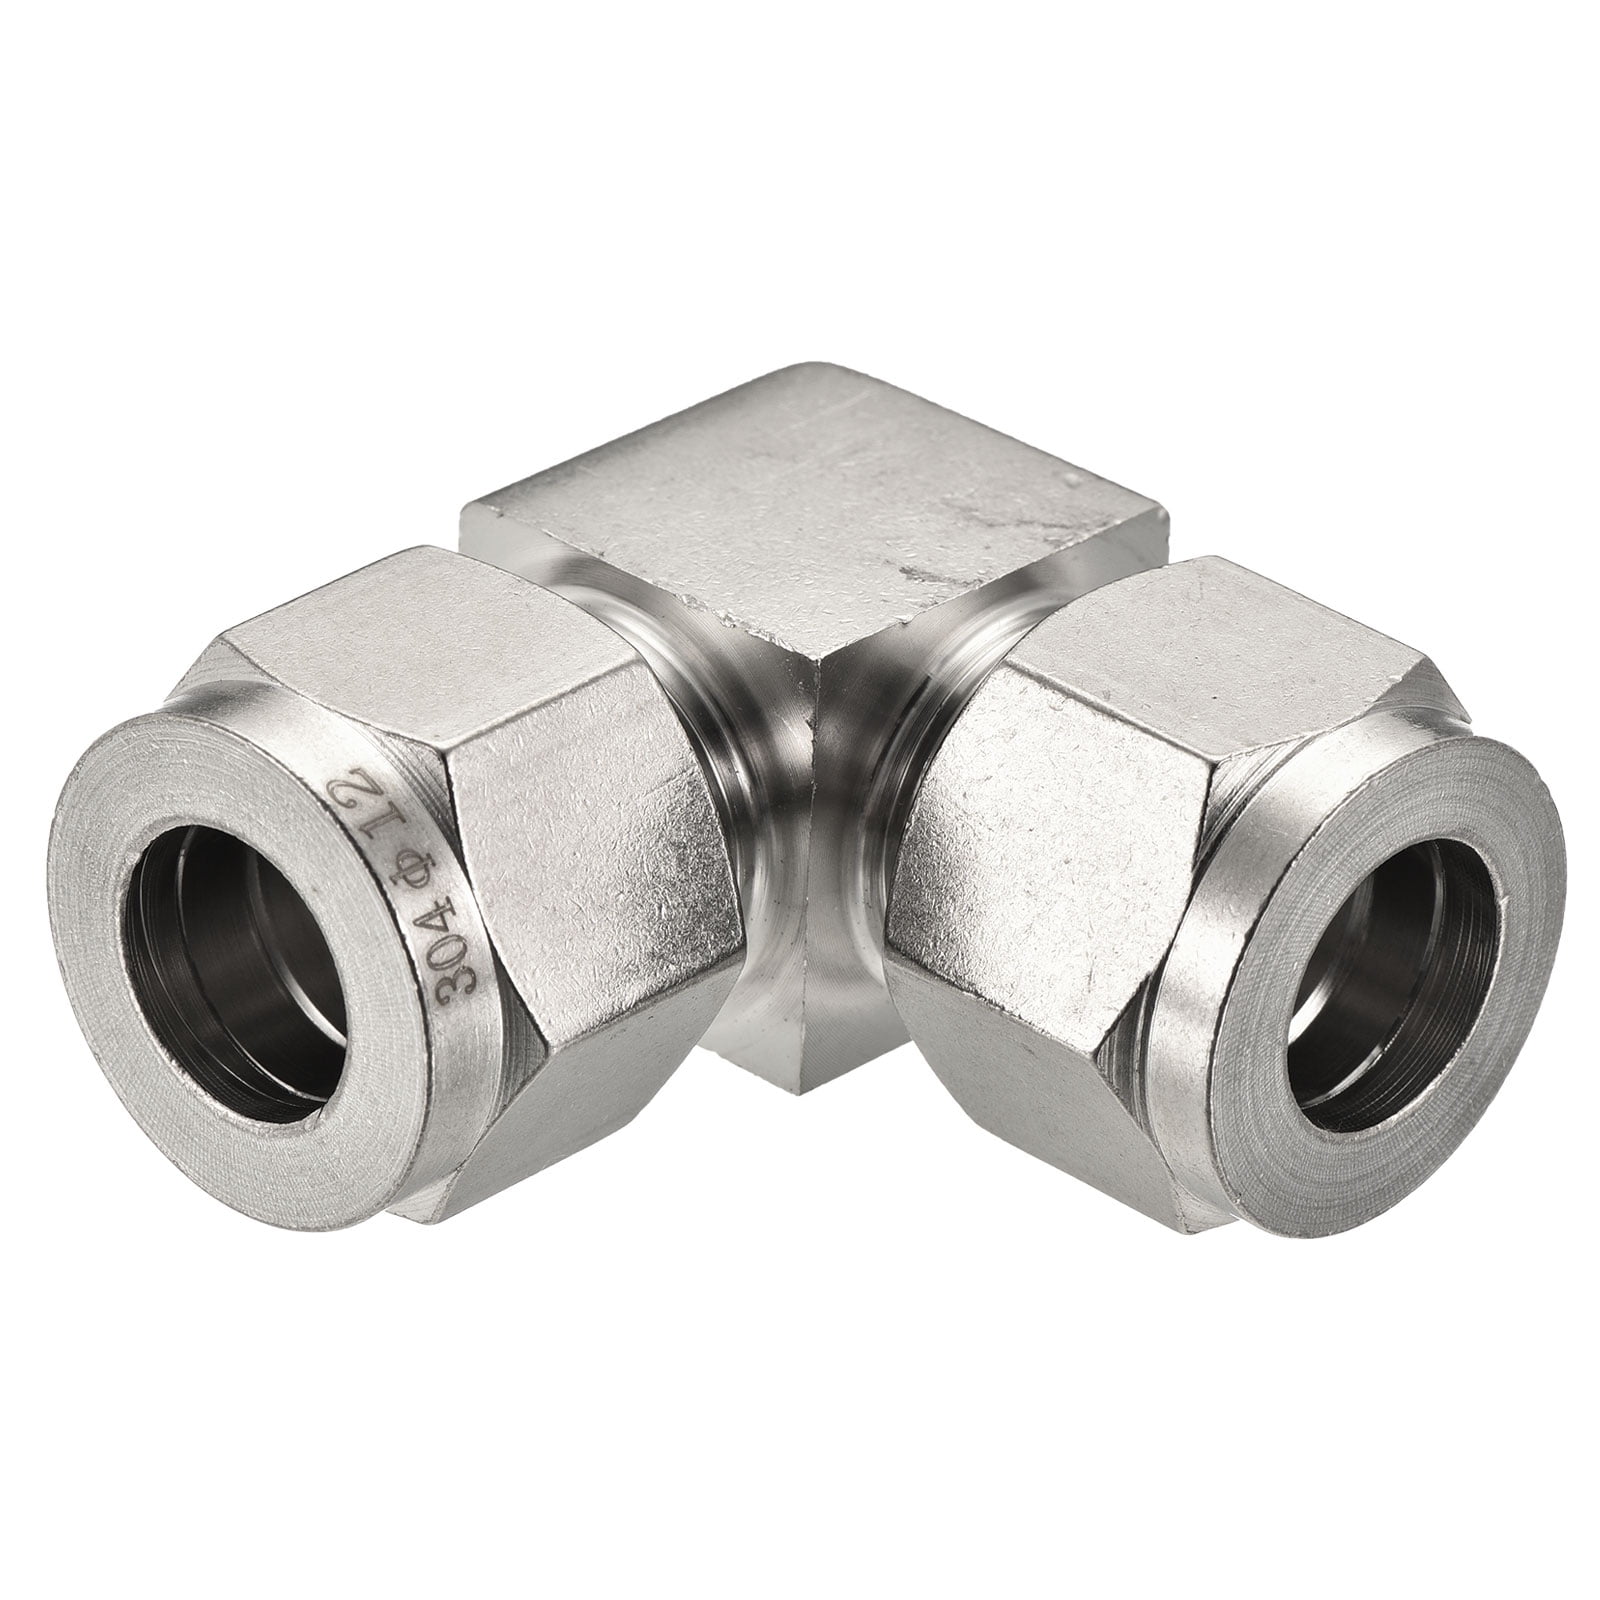 Uxcell 90 Degree Union Elbow 12mm to 12mm OD Tube Stainless Steel